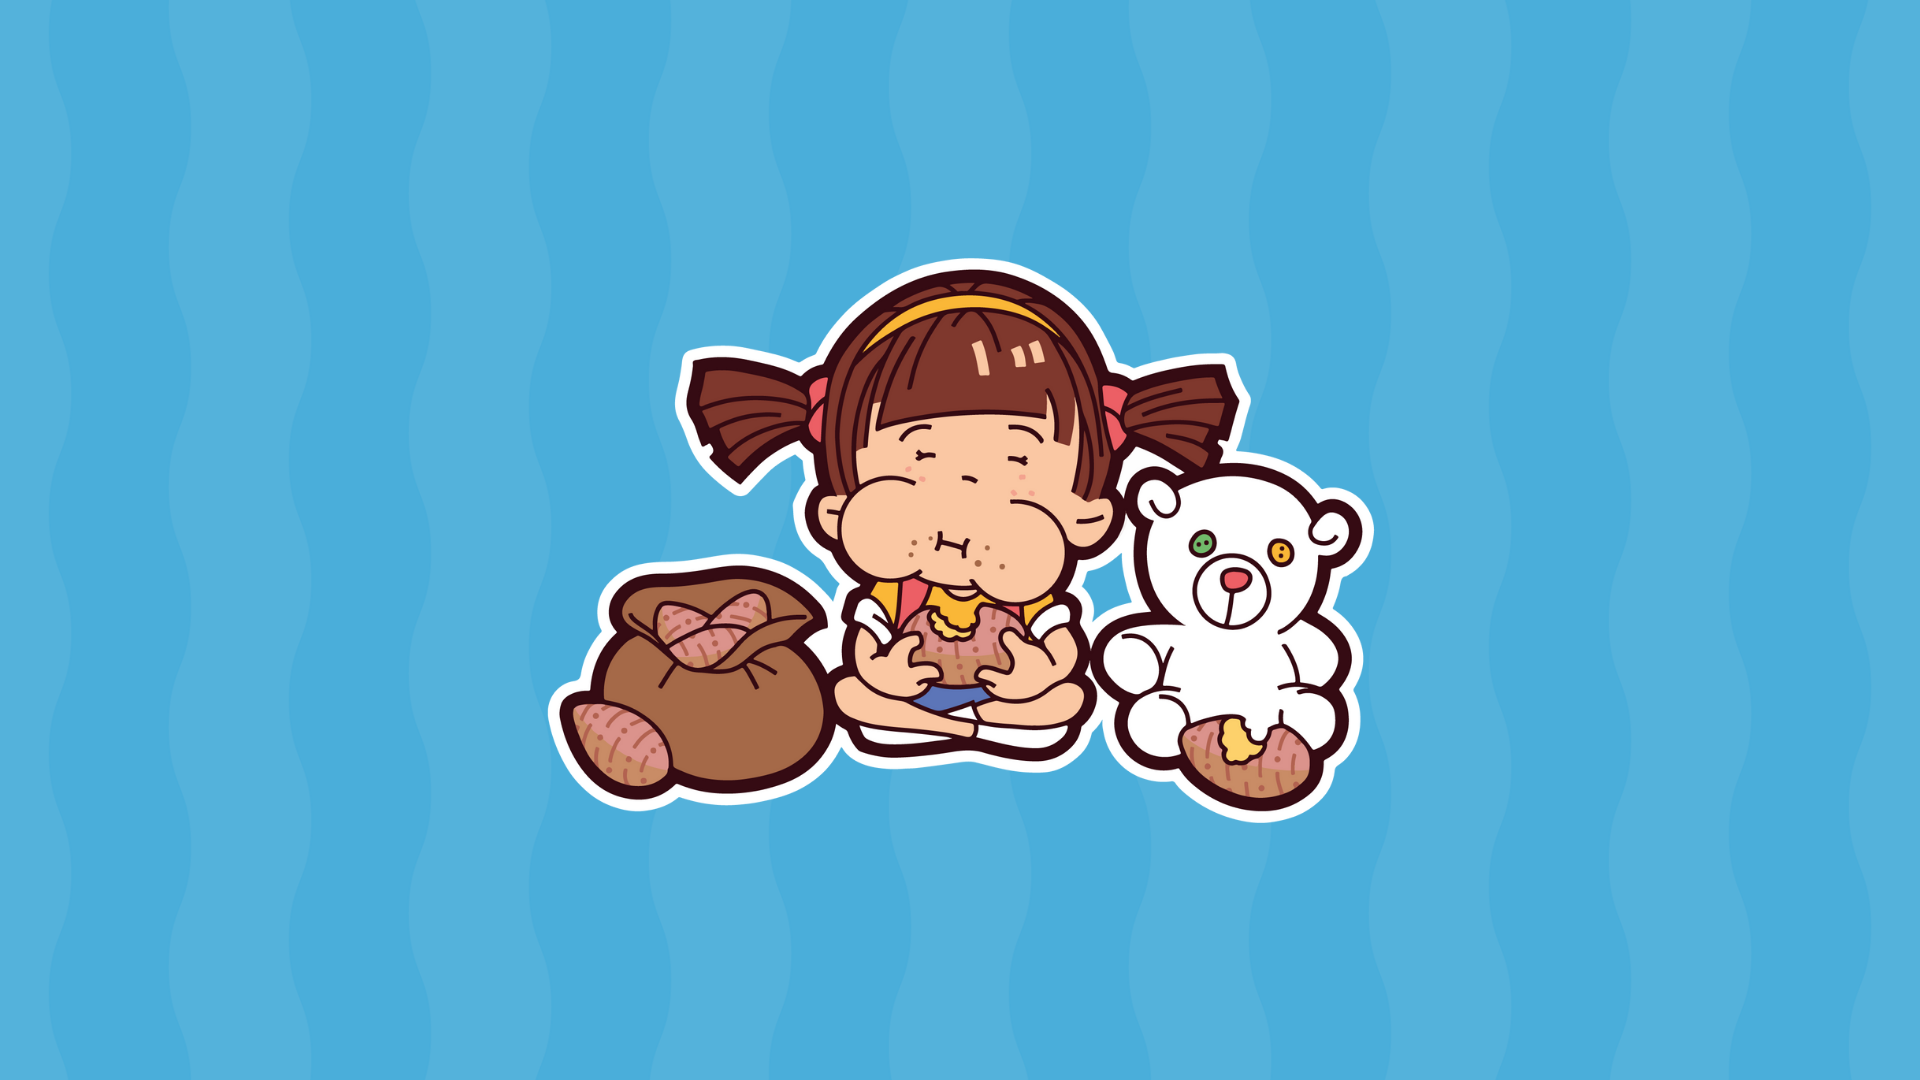 A young girl, the mascot of Mimimi Games, eats a sack of sweet potatoes with her white teddy bear